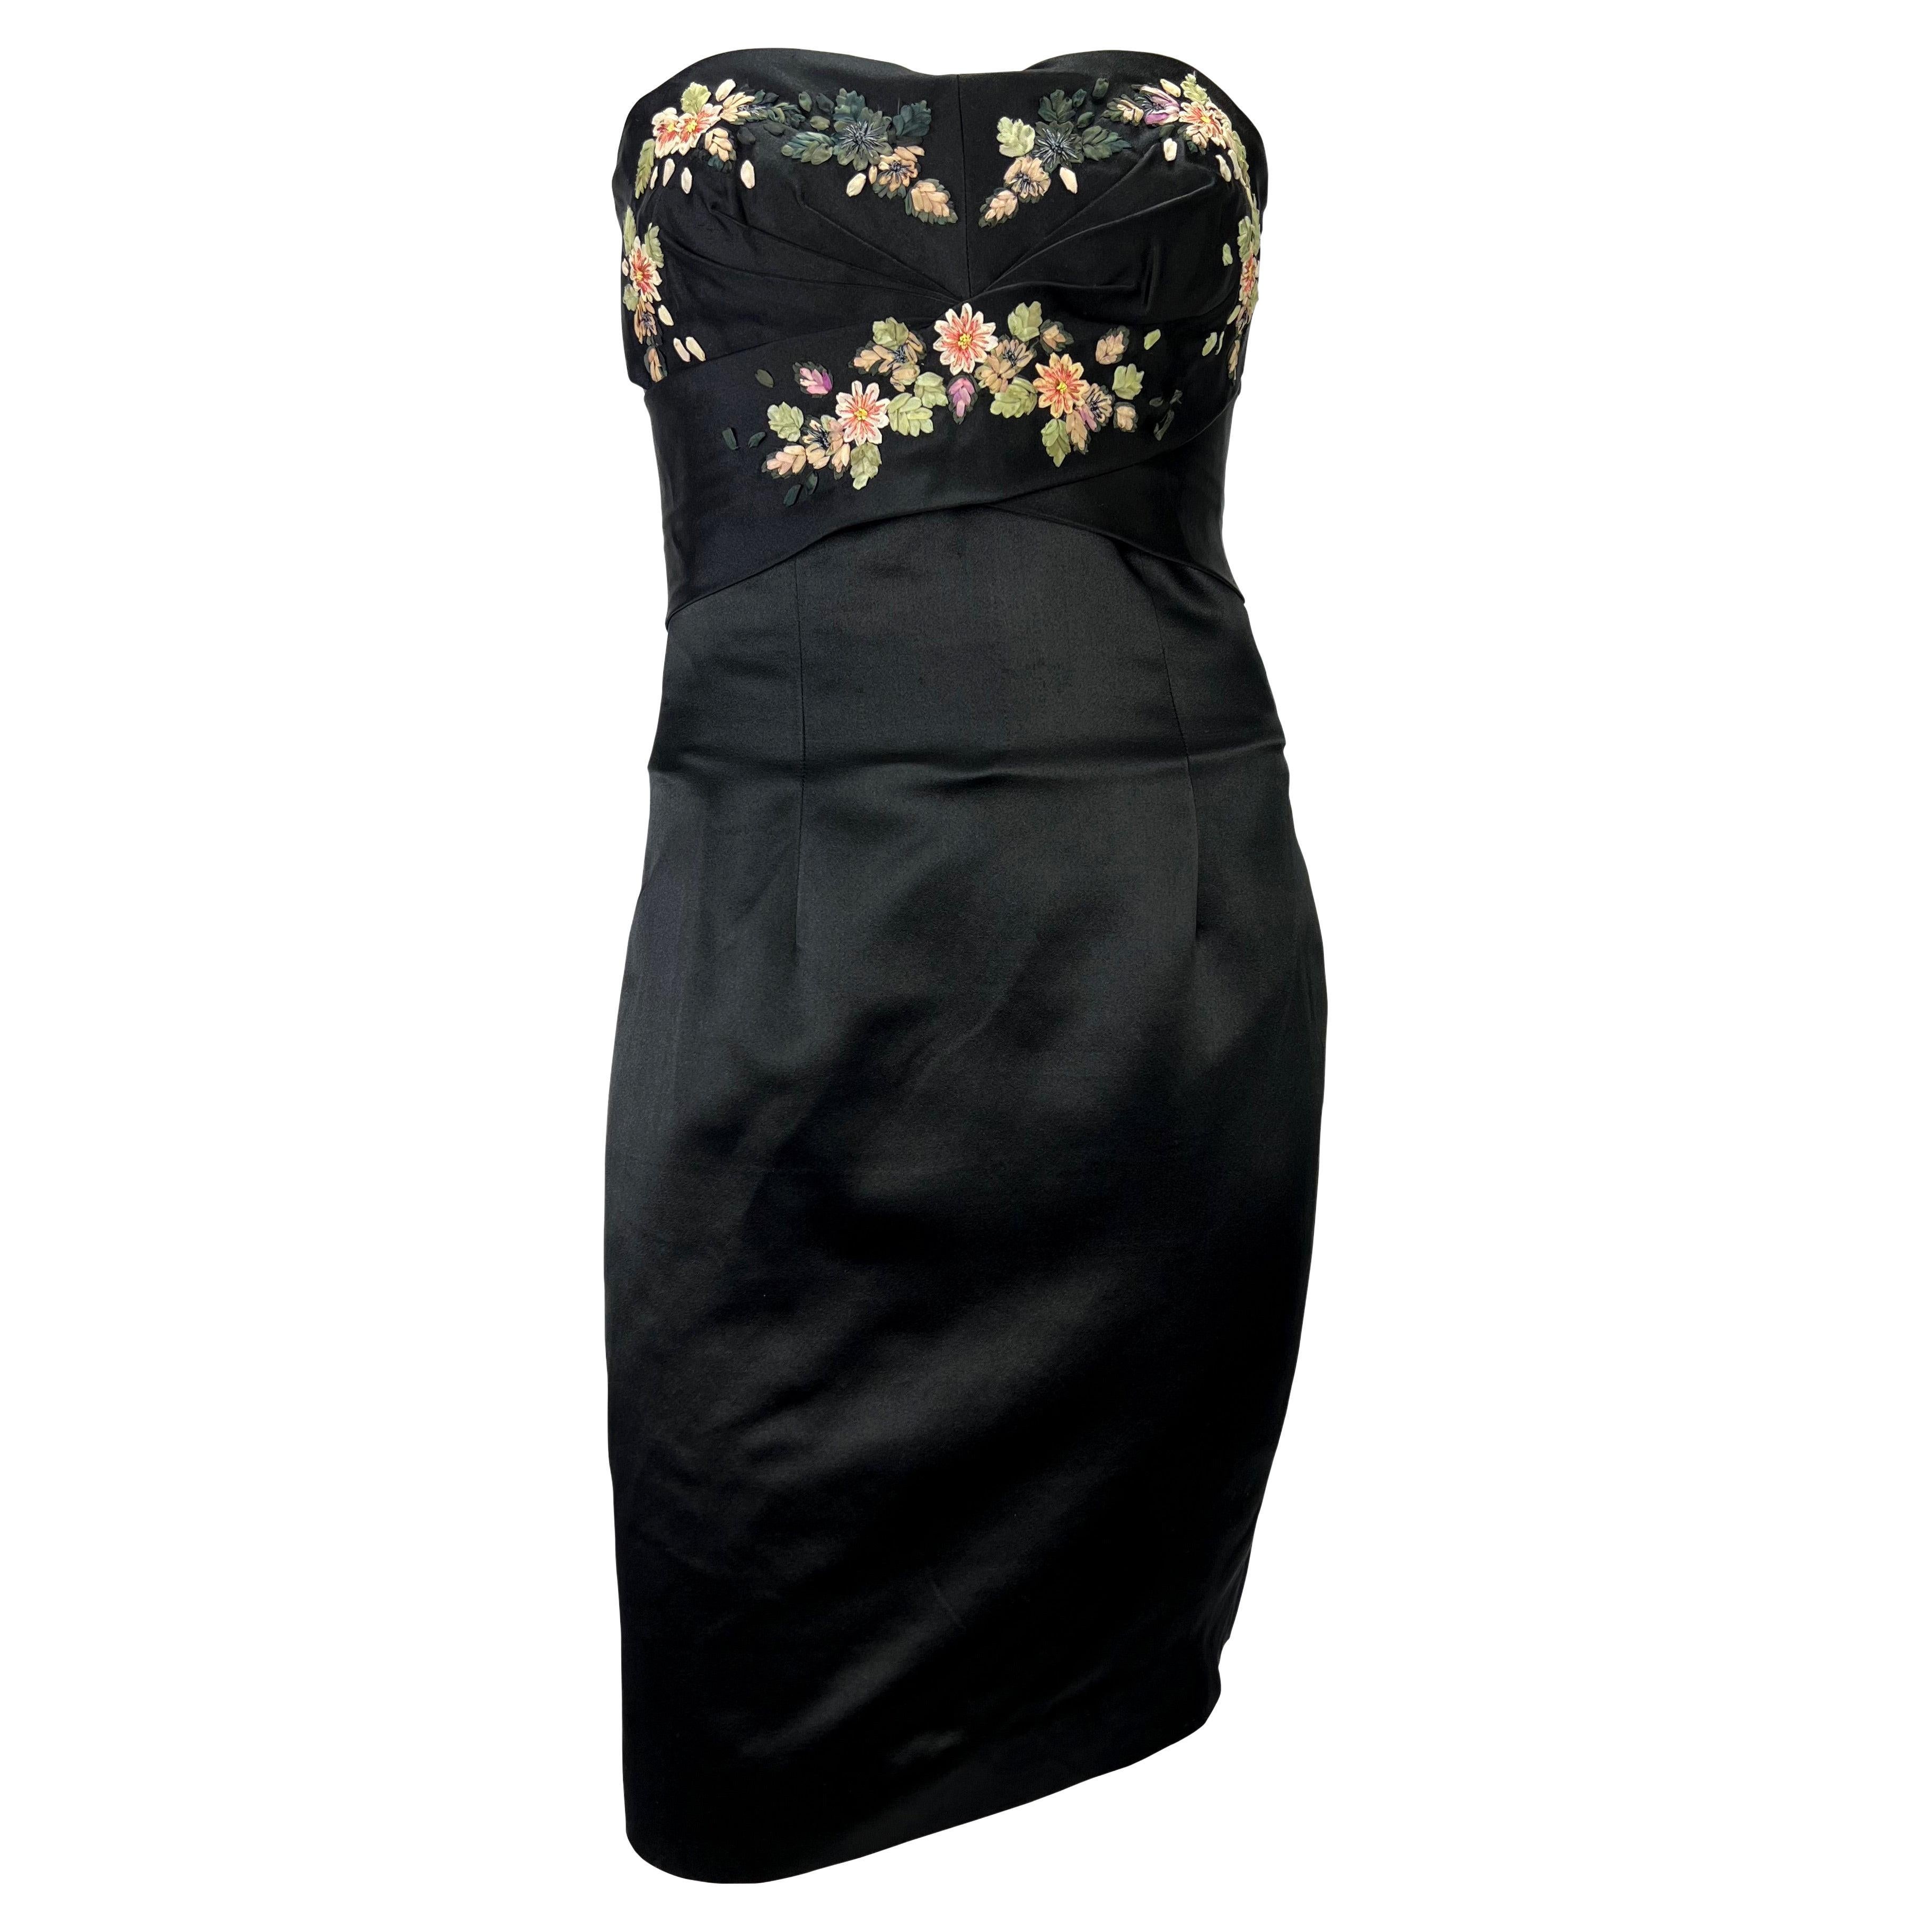 2007 Alexander McQueen Floral Ribbon Embroidery Black Satin Boned Bustier Dress  For Sale